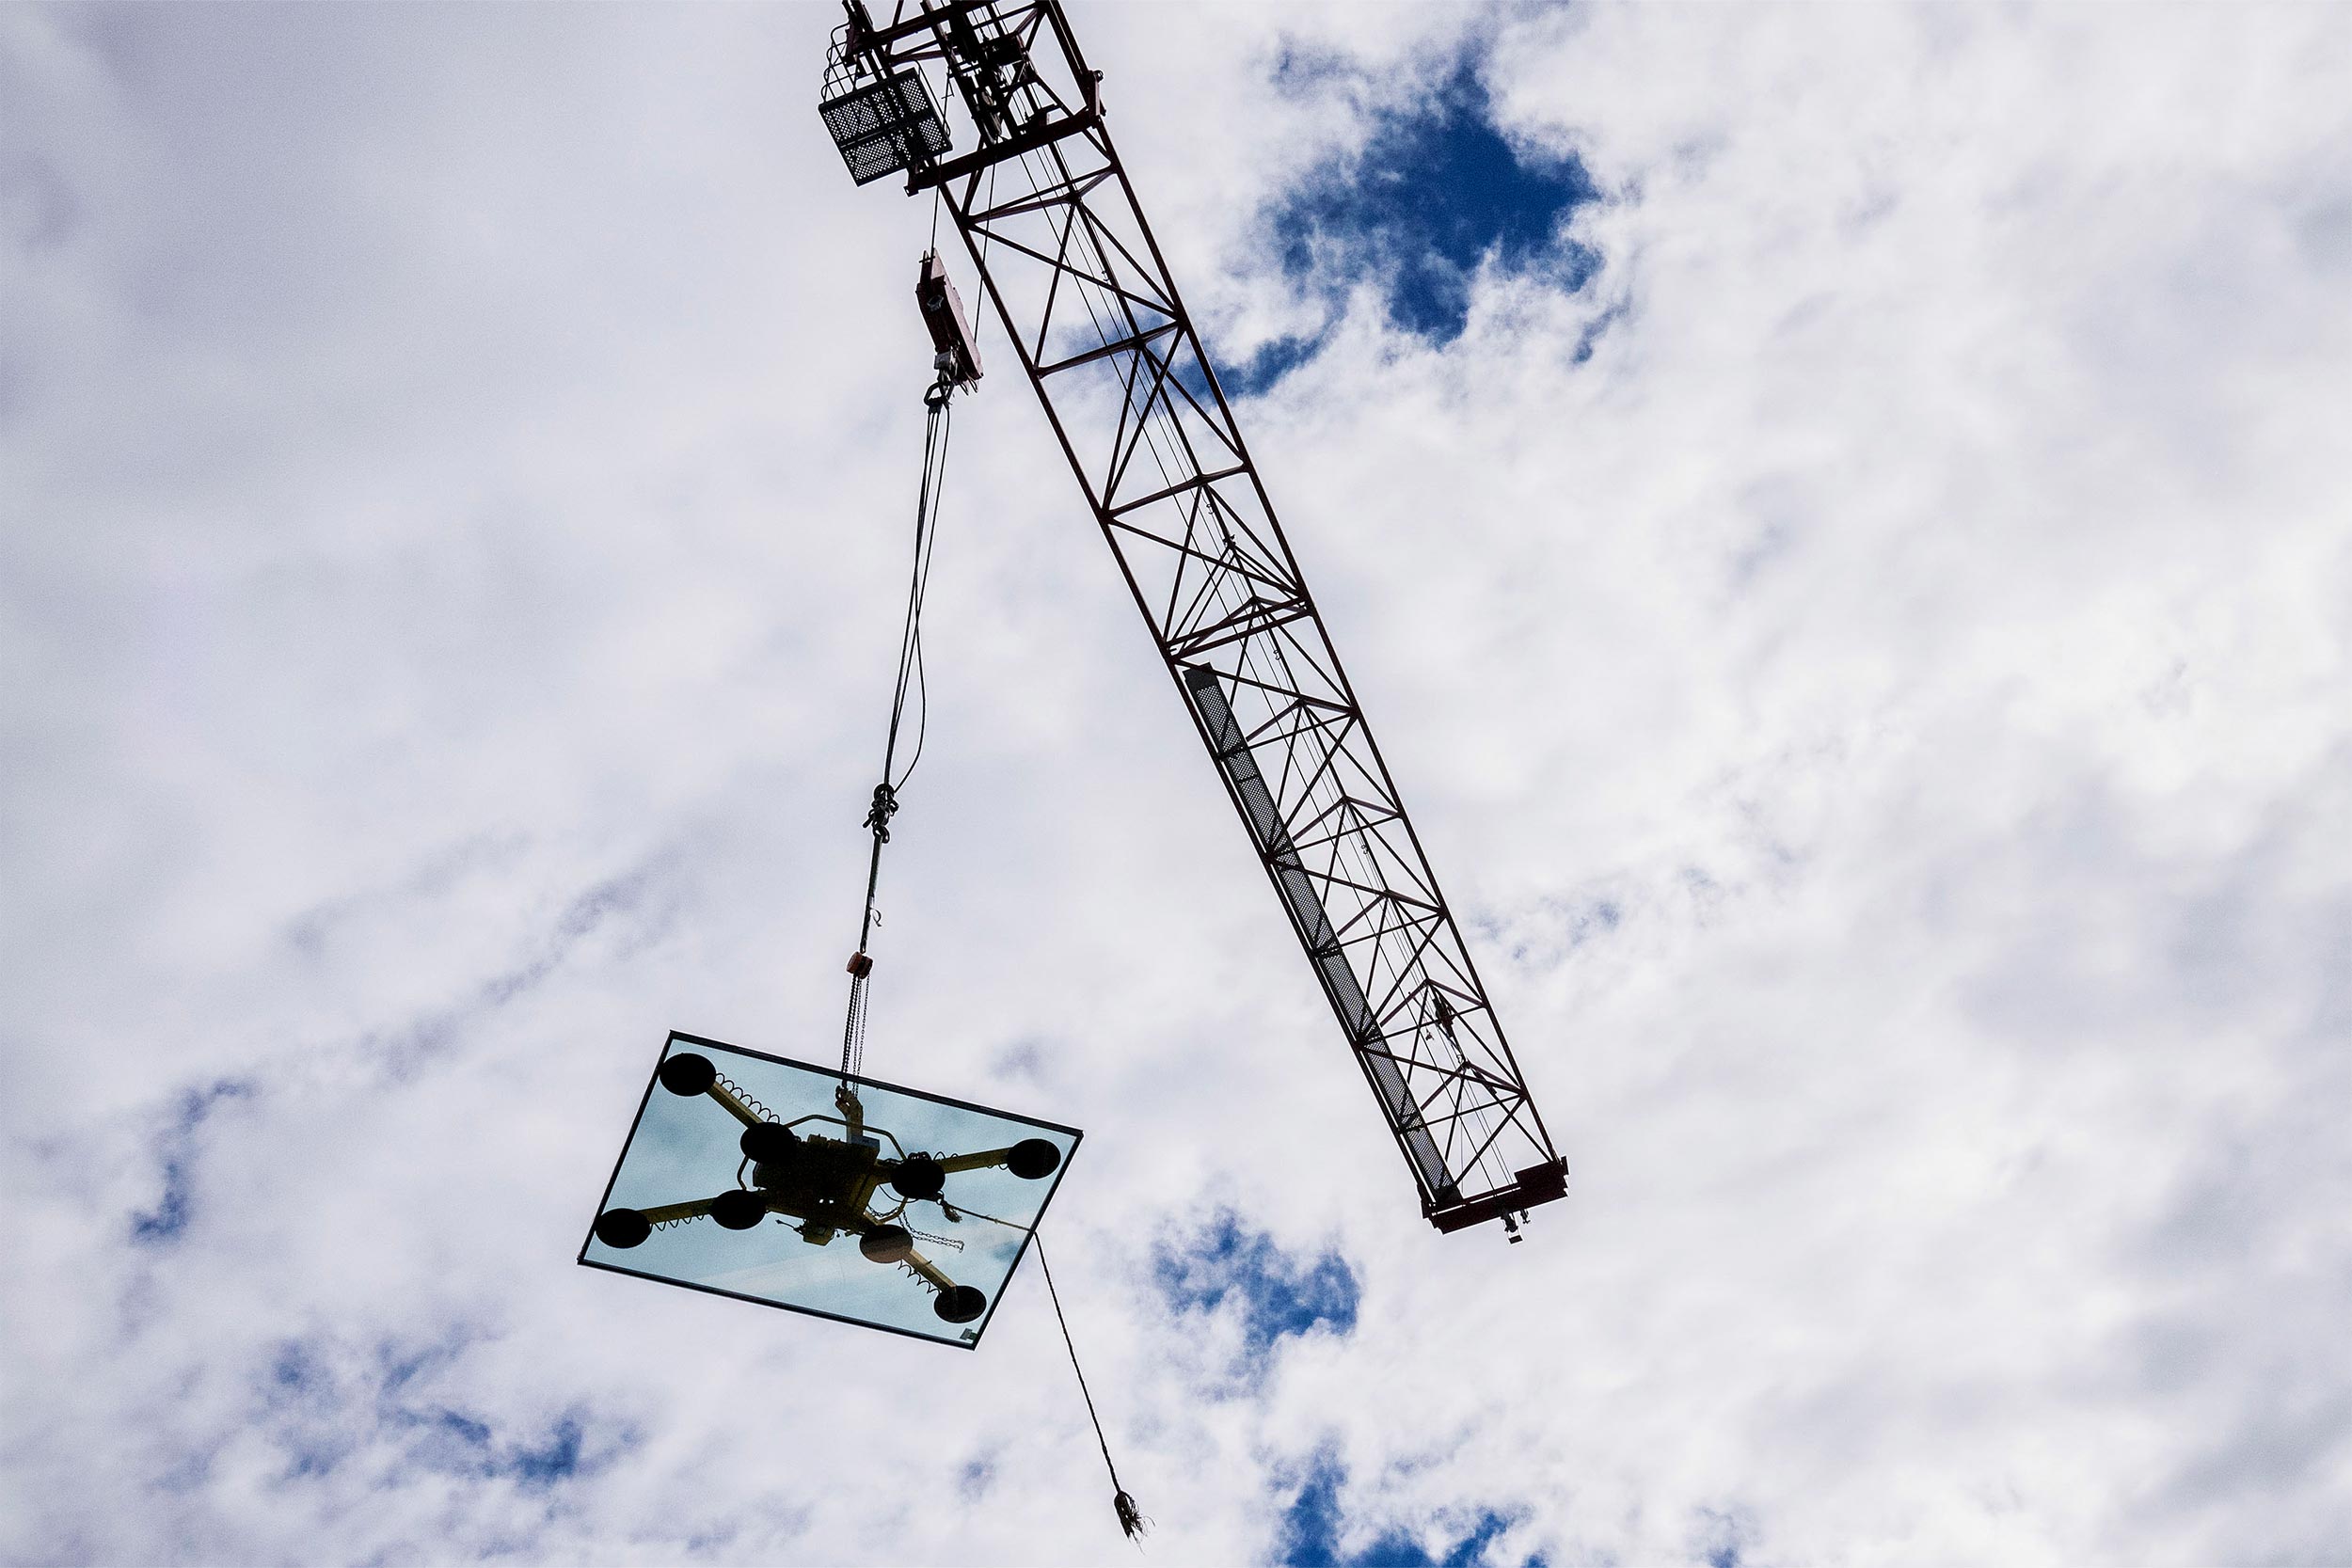 Against a partly cloudy sky, a crane lowers a pane of glass